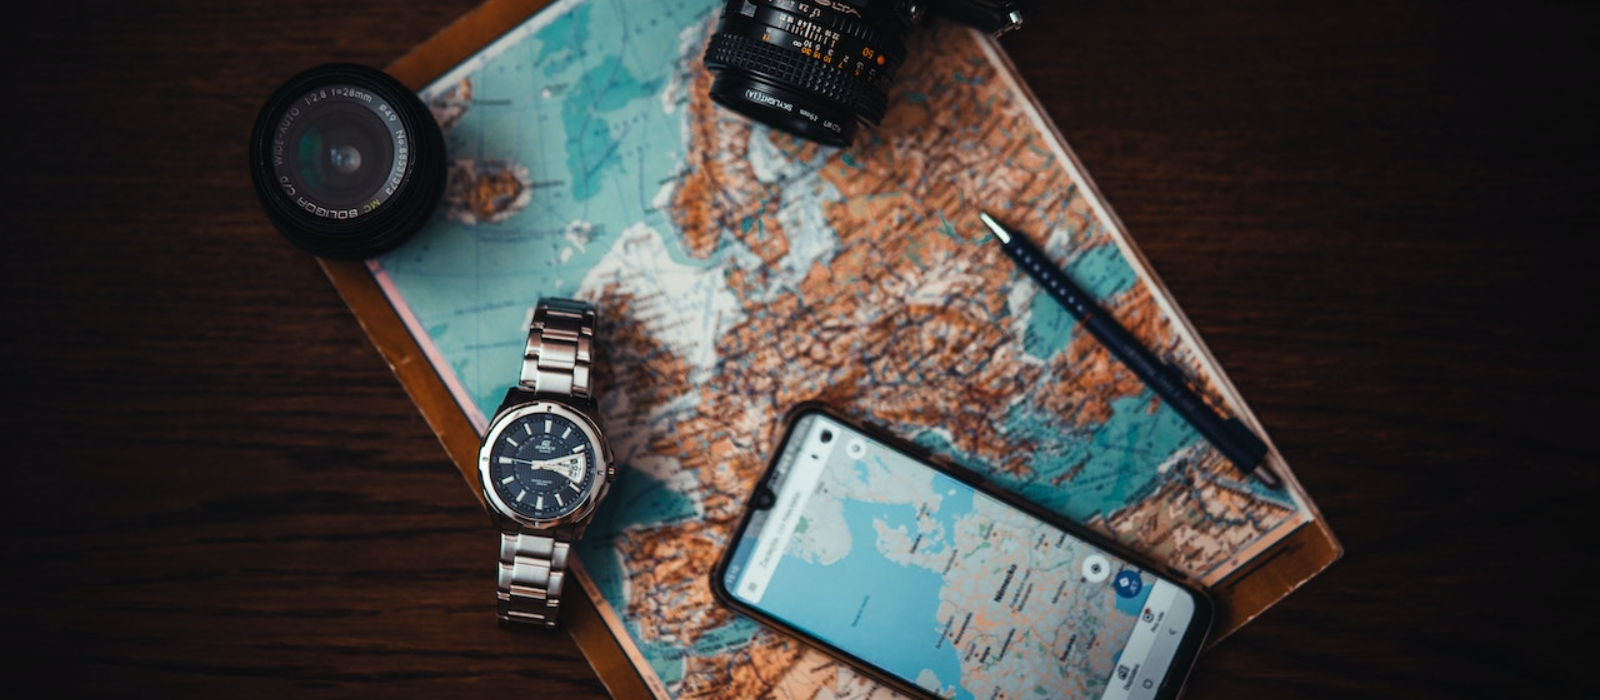 A printed map displaying Europe with a smartphone, pen, watch, DSLR camera and lens, and a pen laid on it.